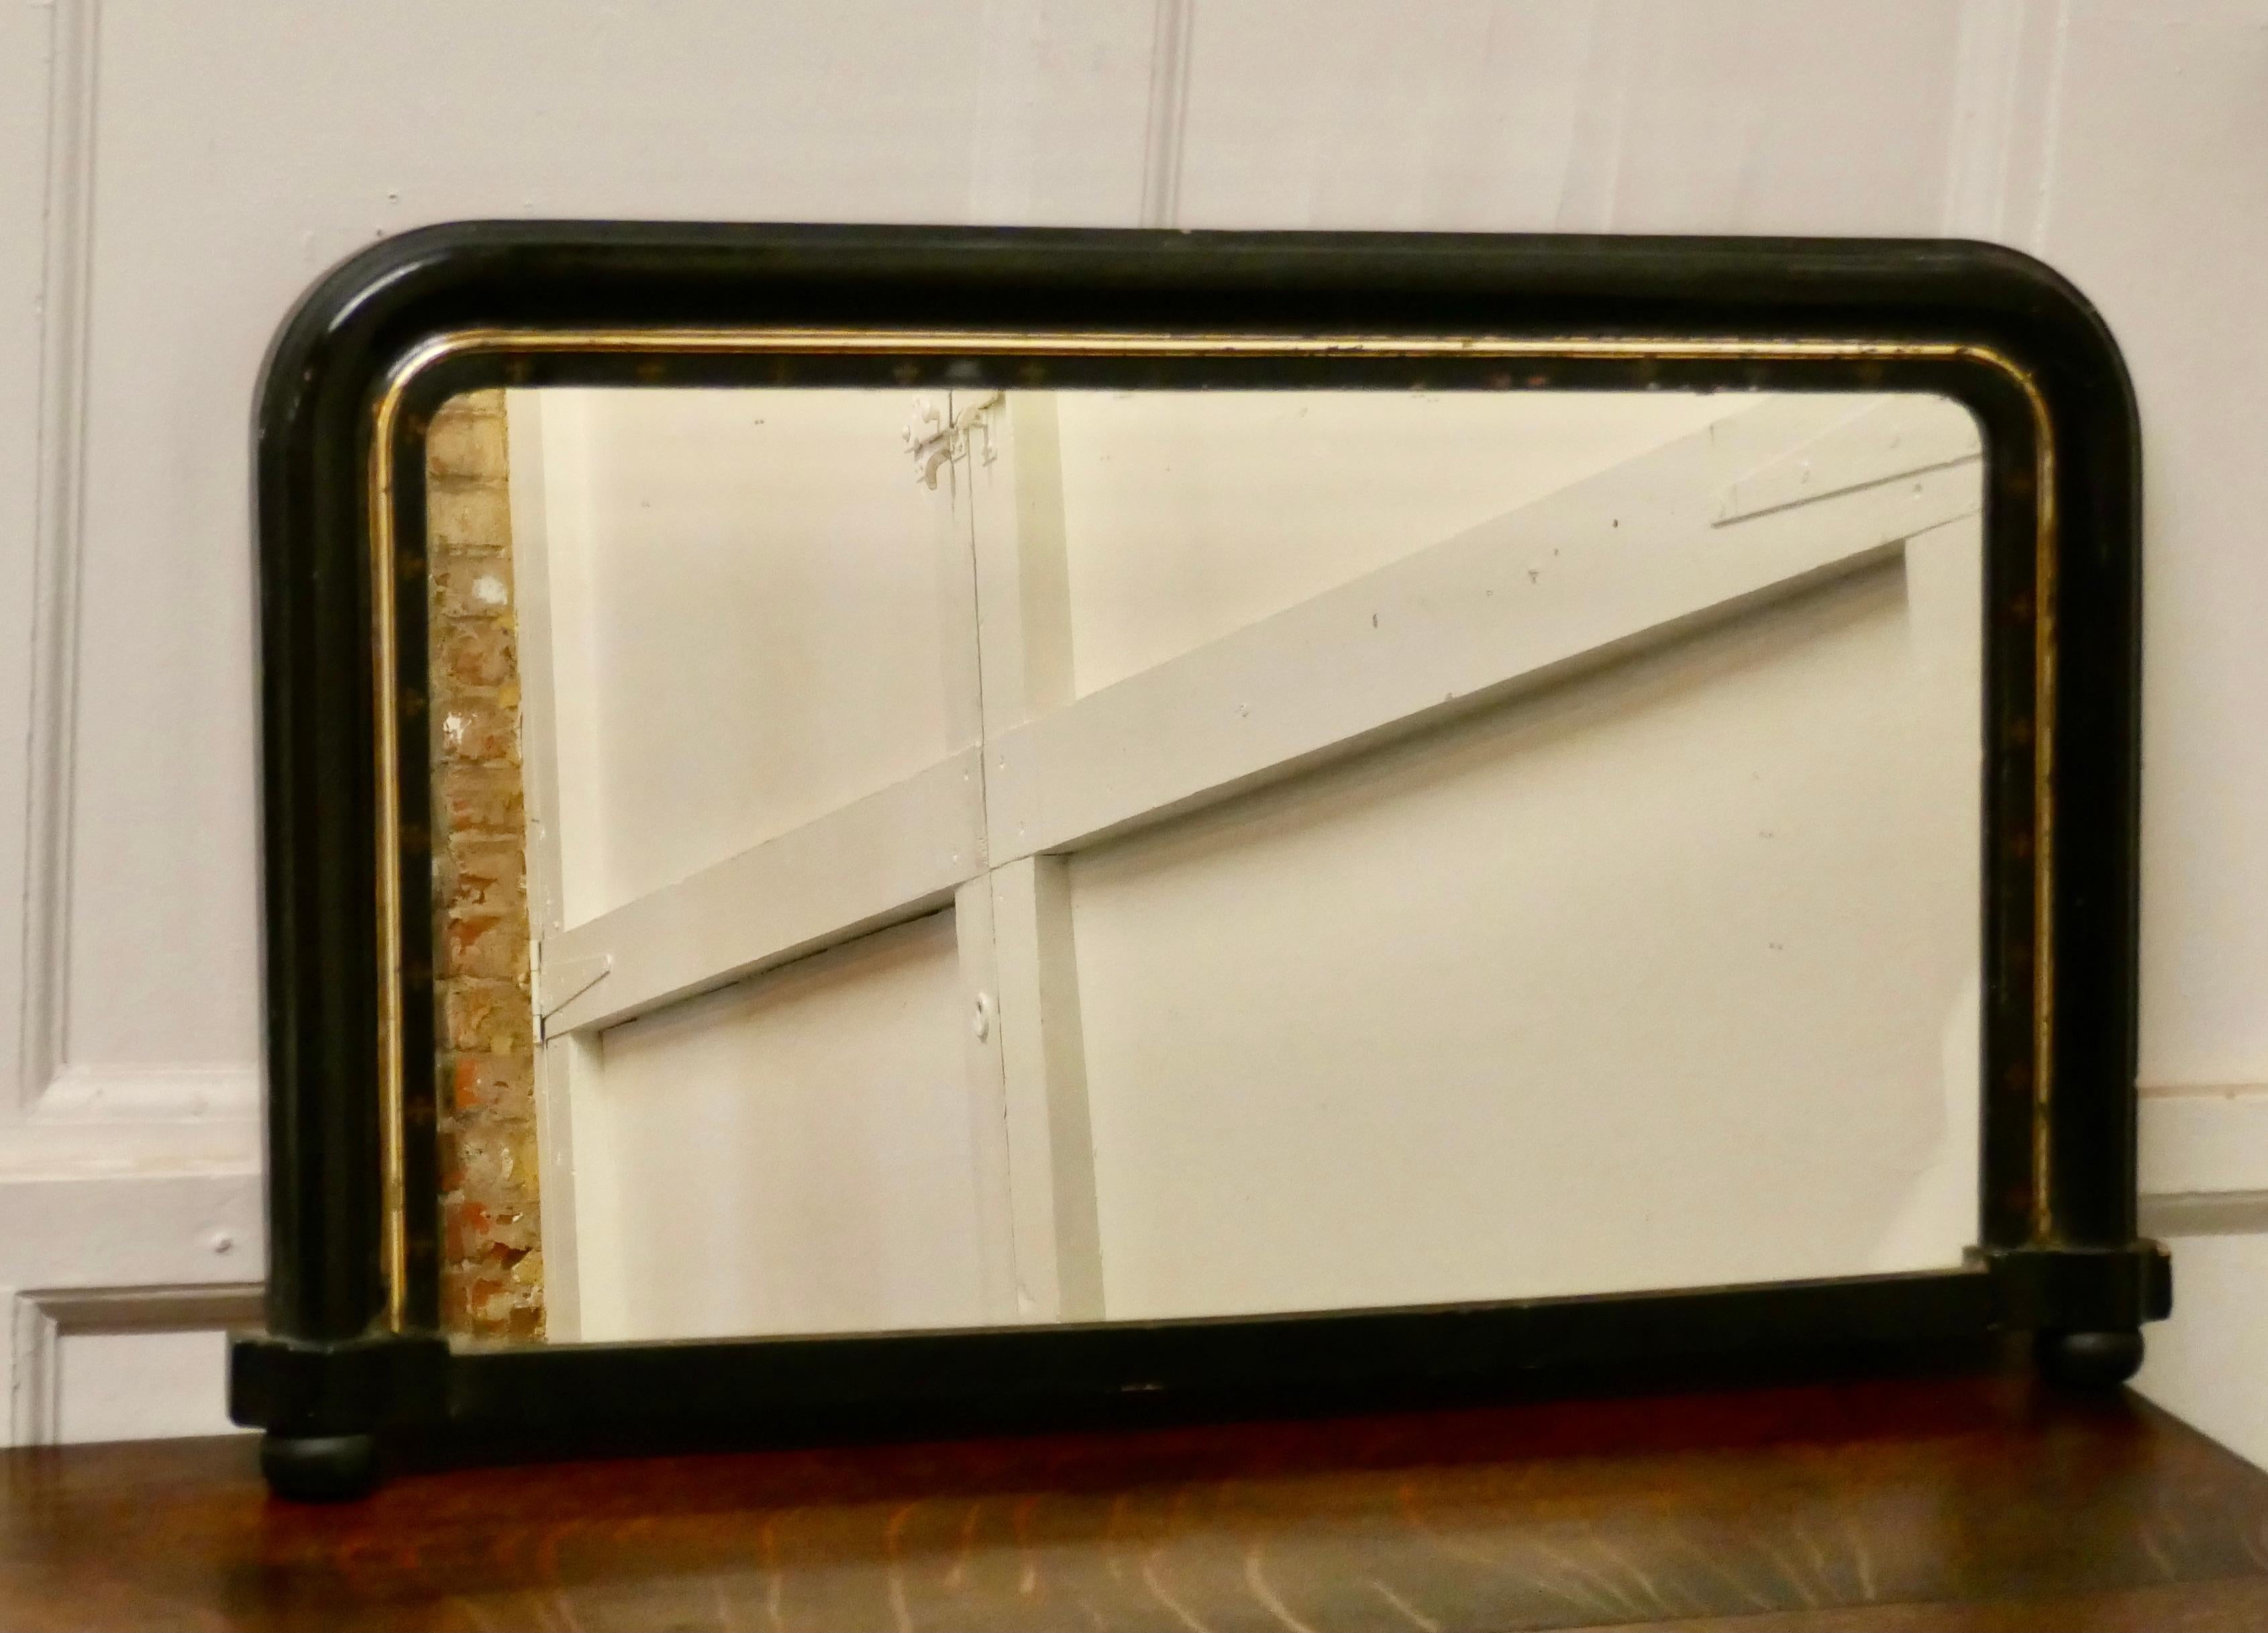 Victorian black lacquer over-mantel mirror

The mirror has a 3” Frame which has rounded top corners, it has a dainty gilt decorated border and it stands on small black bun feet
The mirror glass appears to be original and it is in good